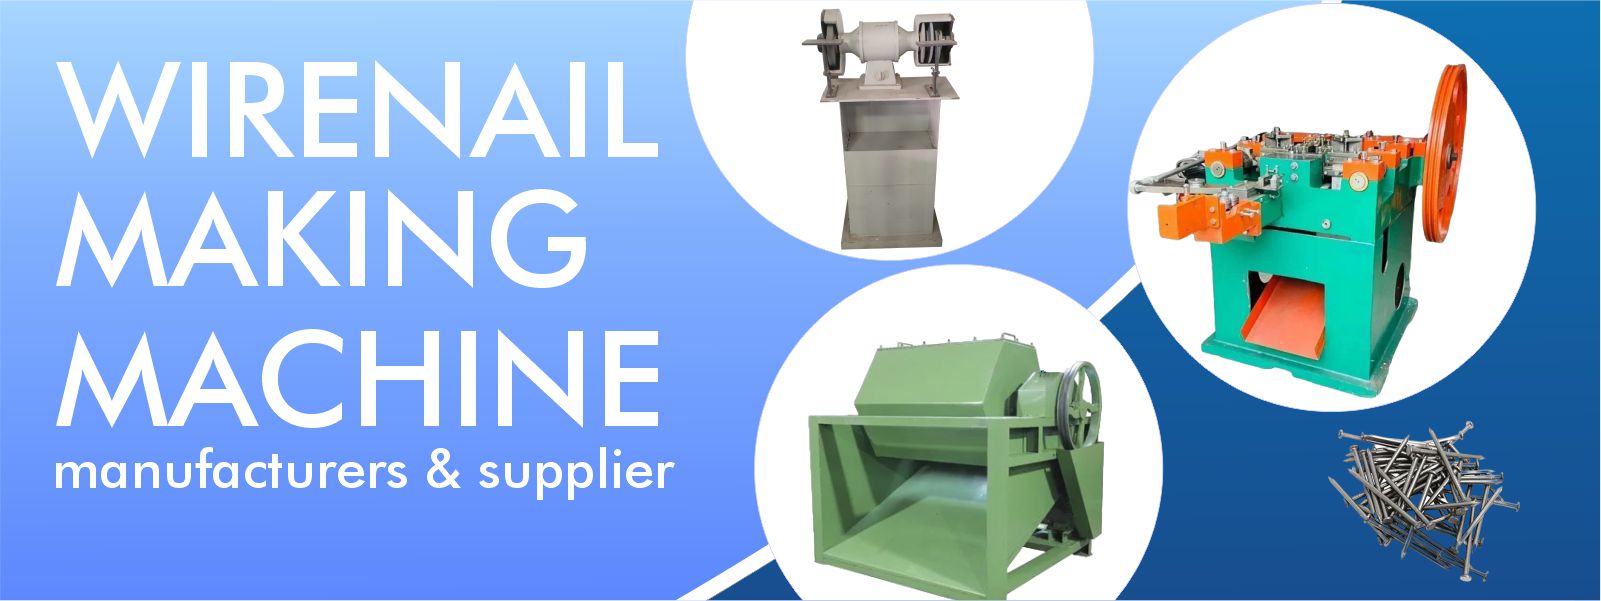 Wire Nail Making Machine in Jalore at best price by Indian Wire Product -  Justdial